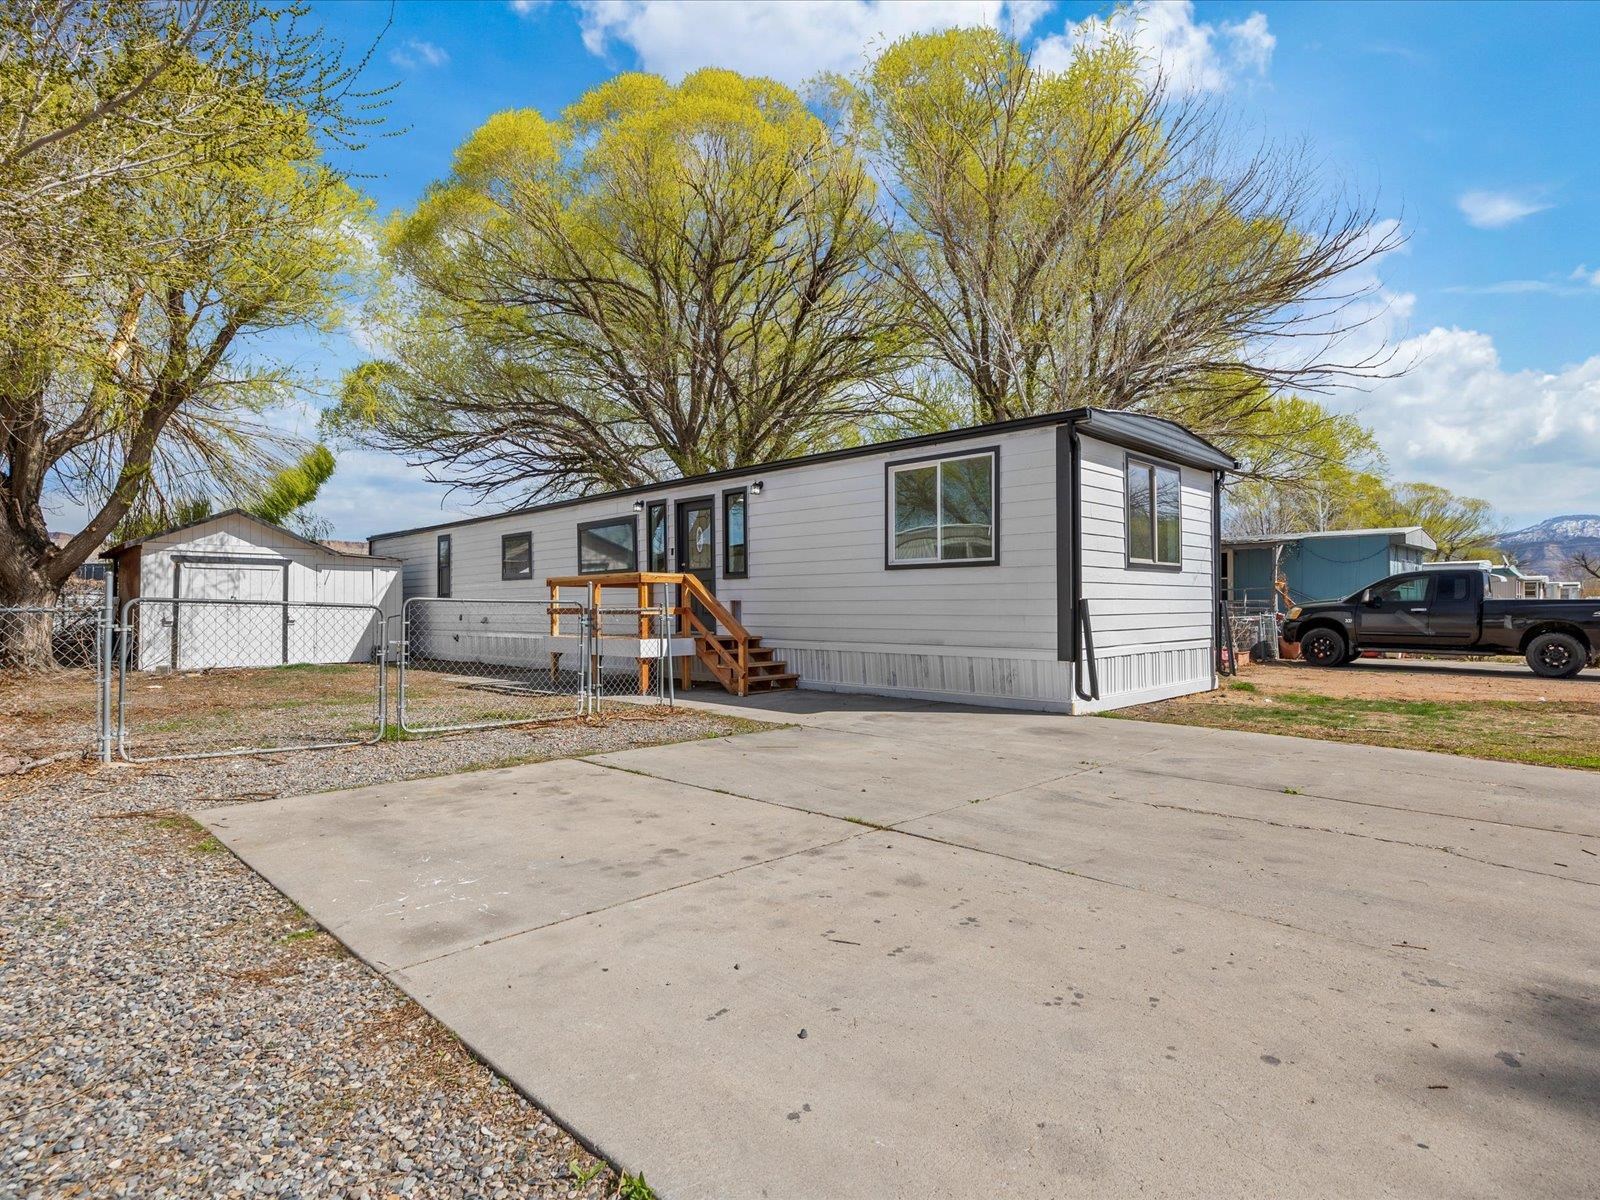 516 31 1/2 Road 12, Grand Junction, CO 81504